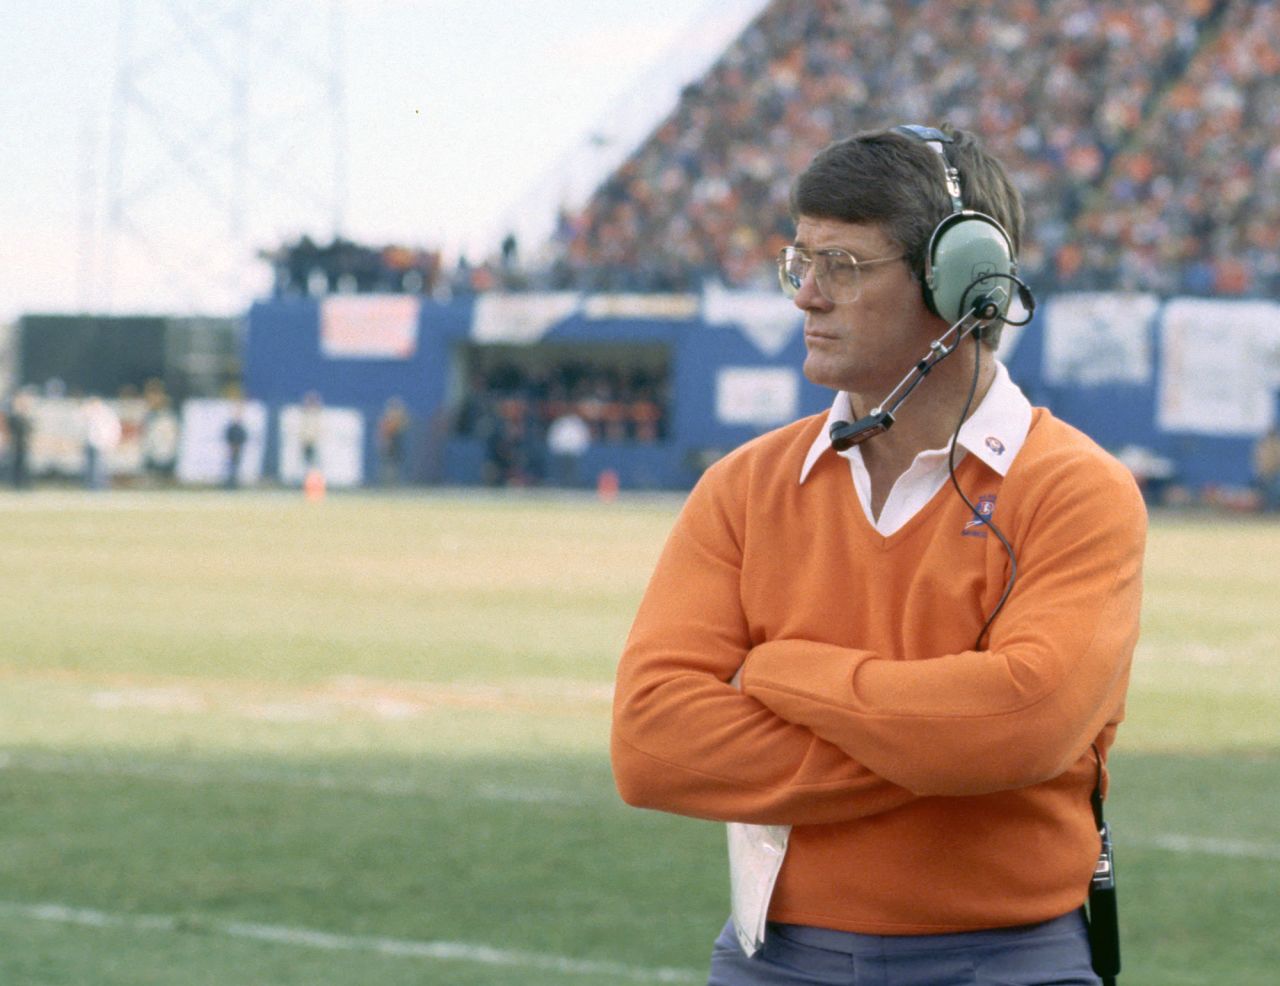 Dan Reeves, a former NFL running back and head coach, died January 1 at the age of 77. Reeves coached 23 seasons in the NFL and was twice named Coach of the Year.